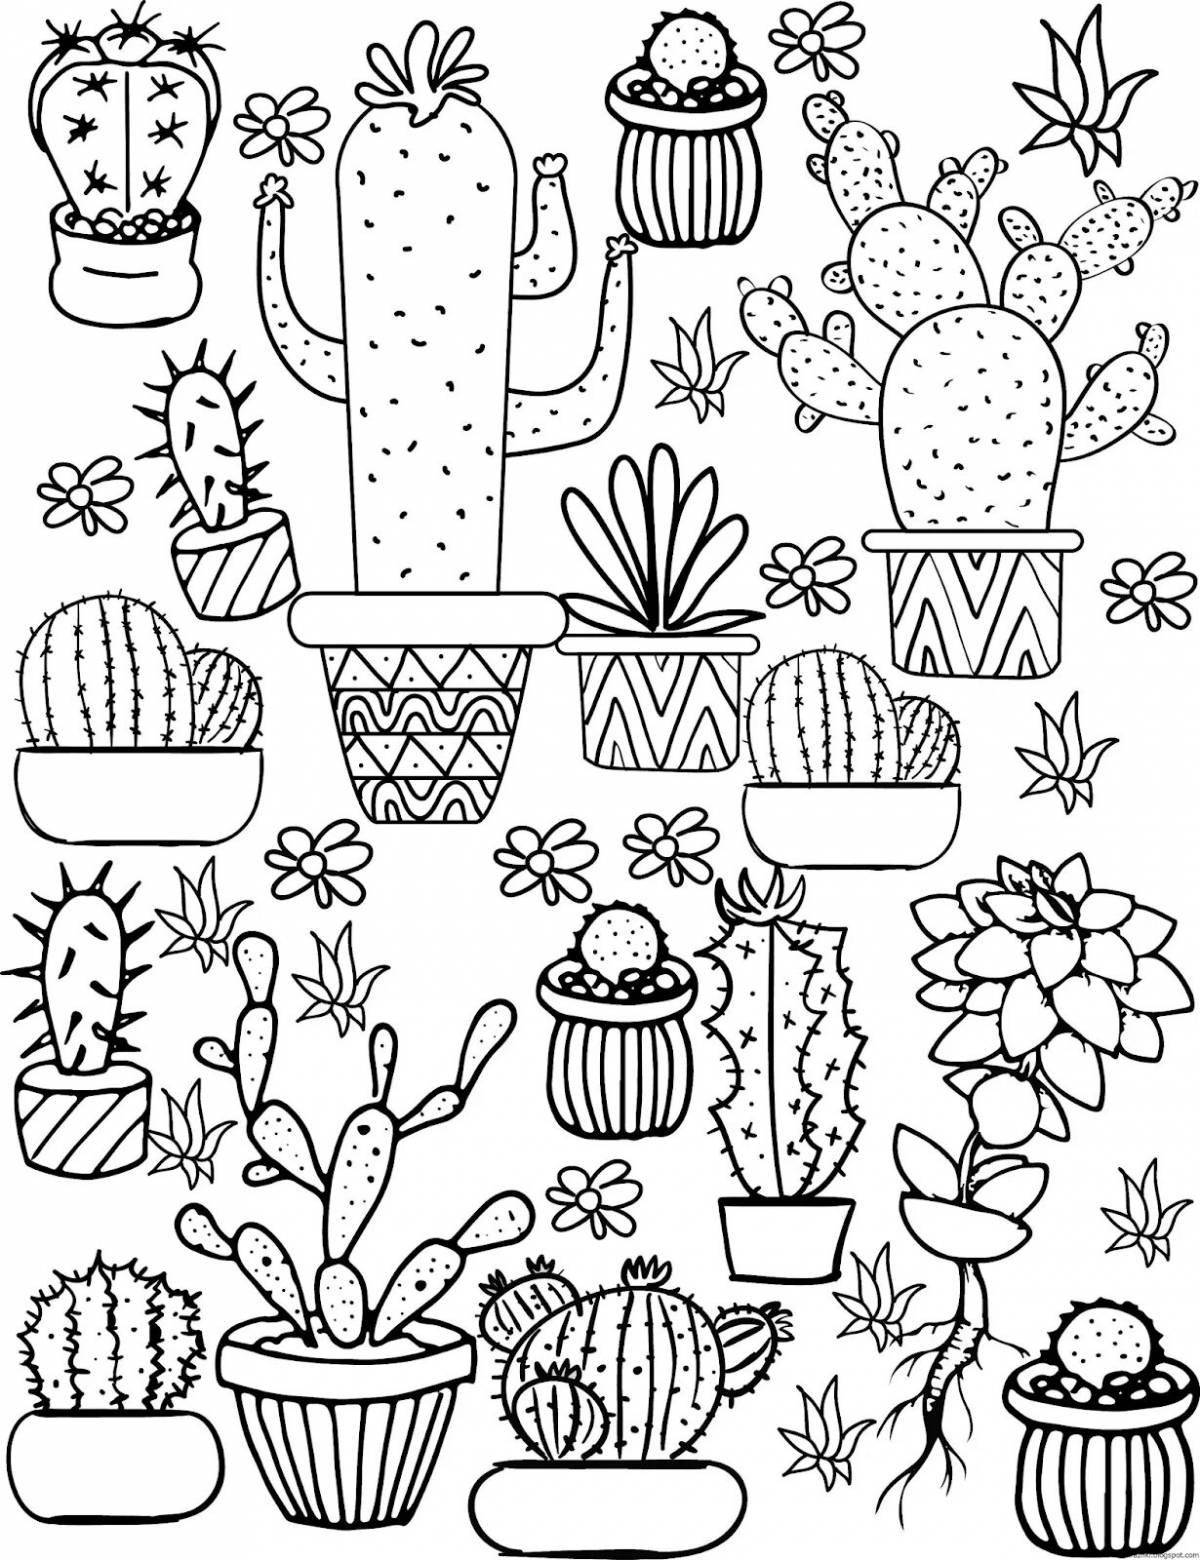 Colourful coloring stickers for imagination